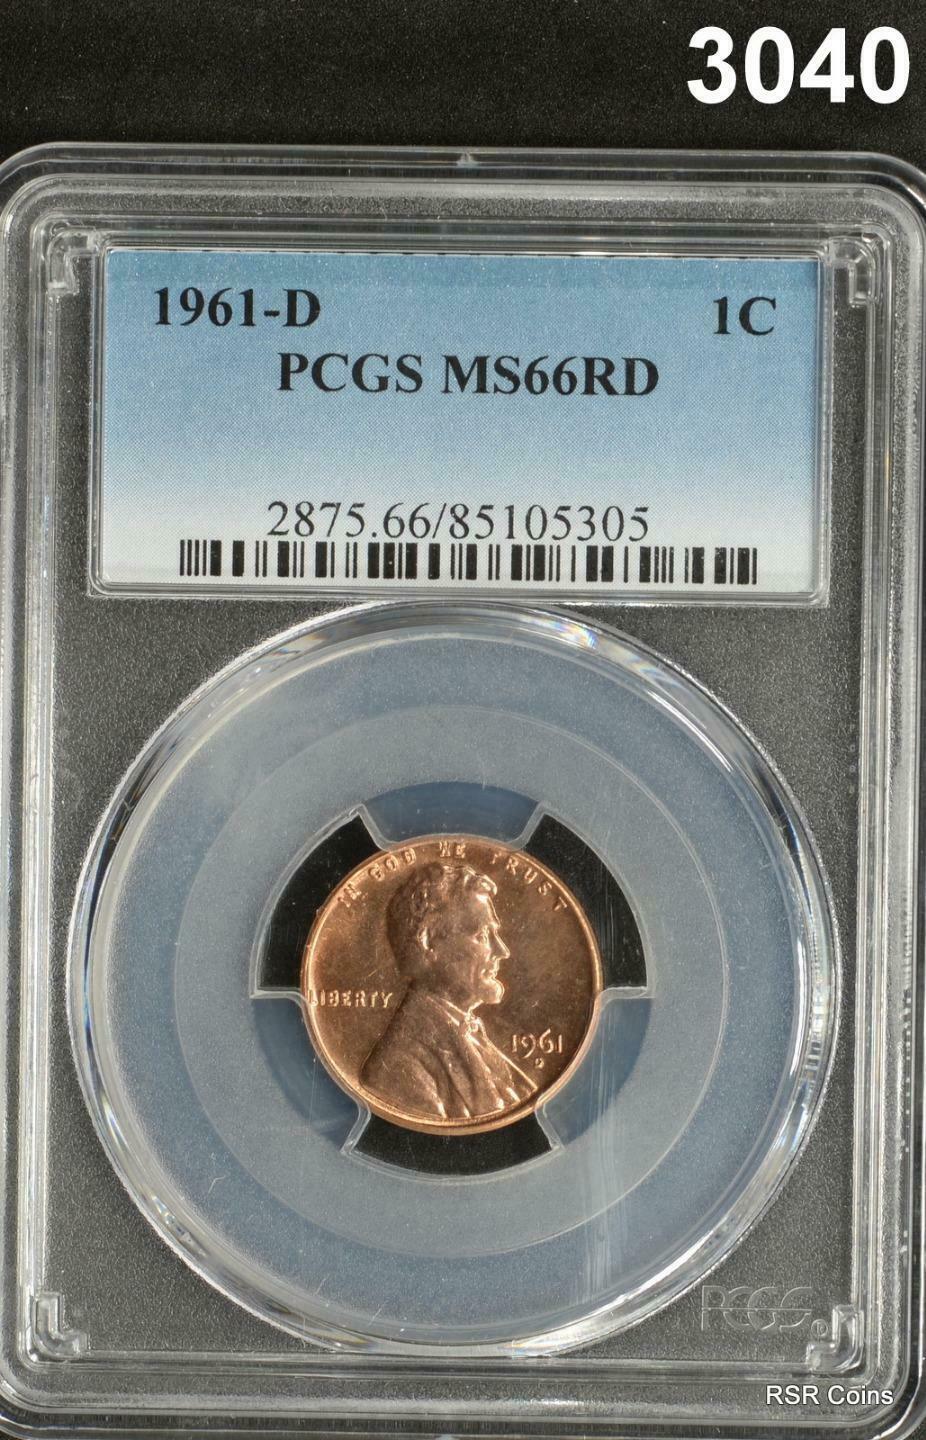 1961 D PCGS CERTIFIED MS 66 RD LINCOLN WHEAT PENNY! FLASHY LUSTER #3040